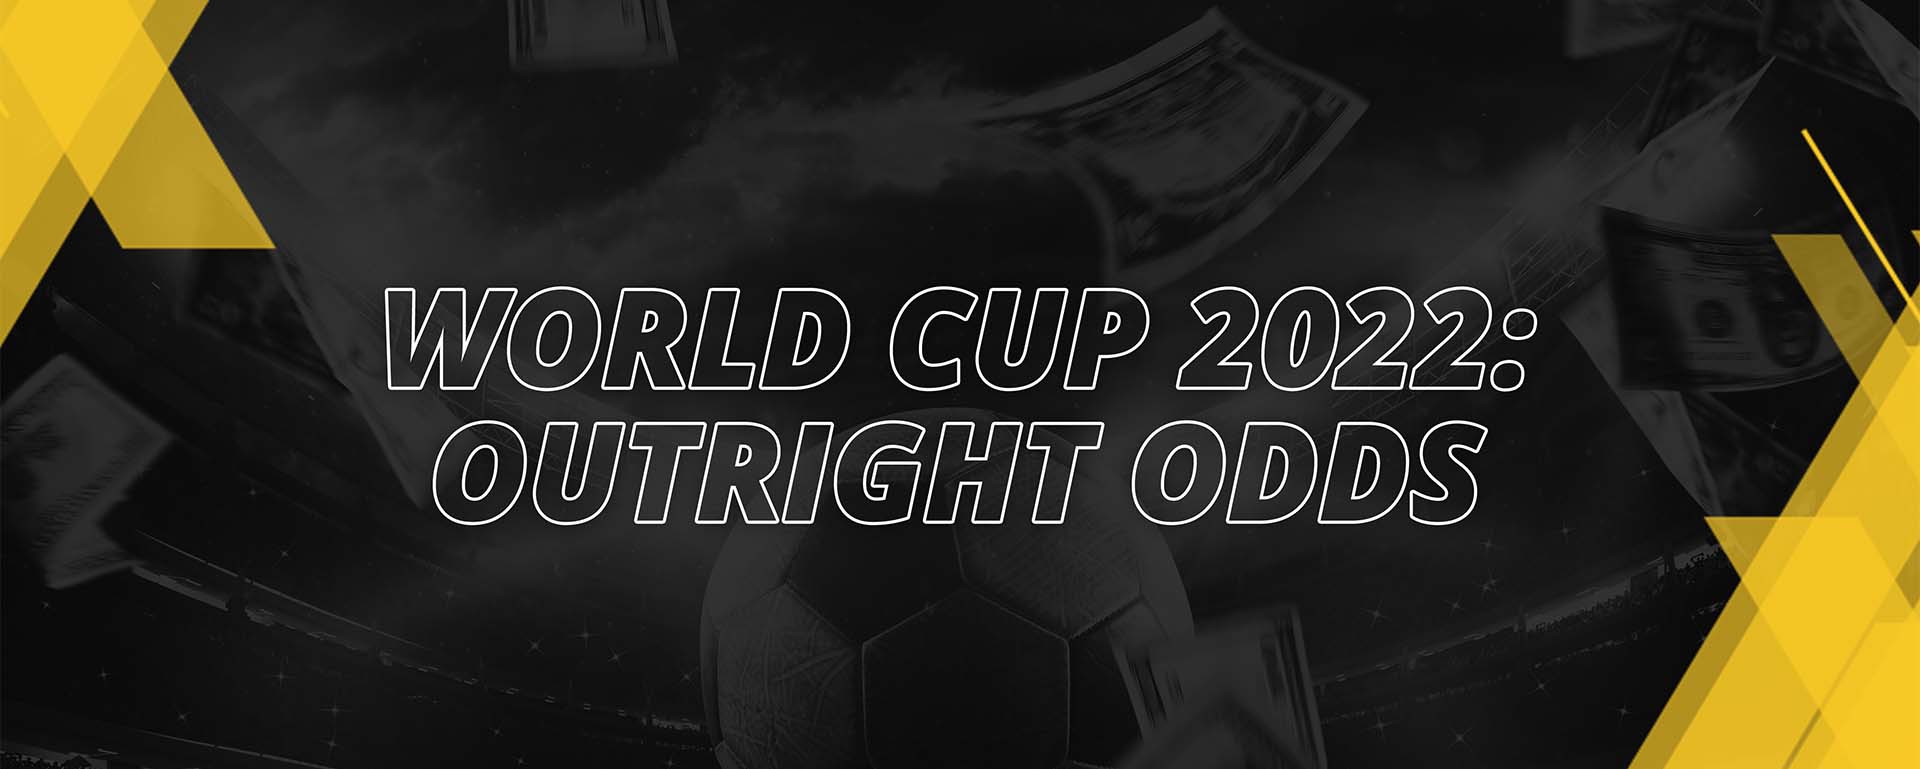 WORLD CUP 2022: OUTRIGHT ODDS